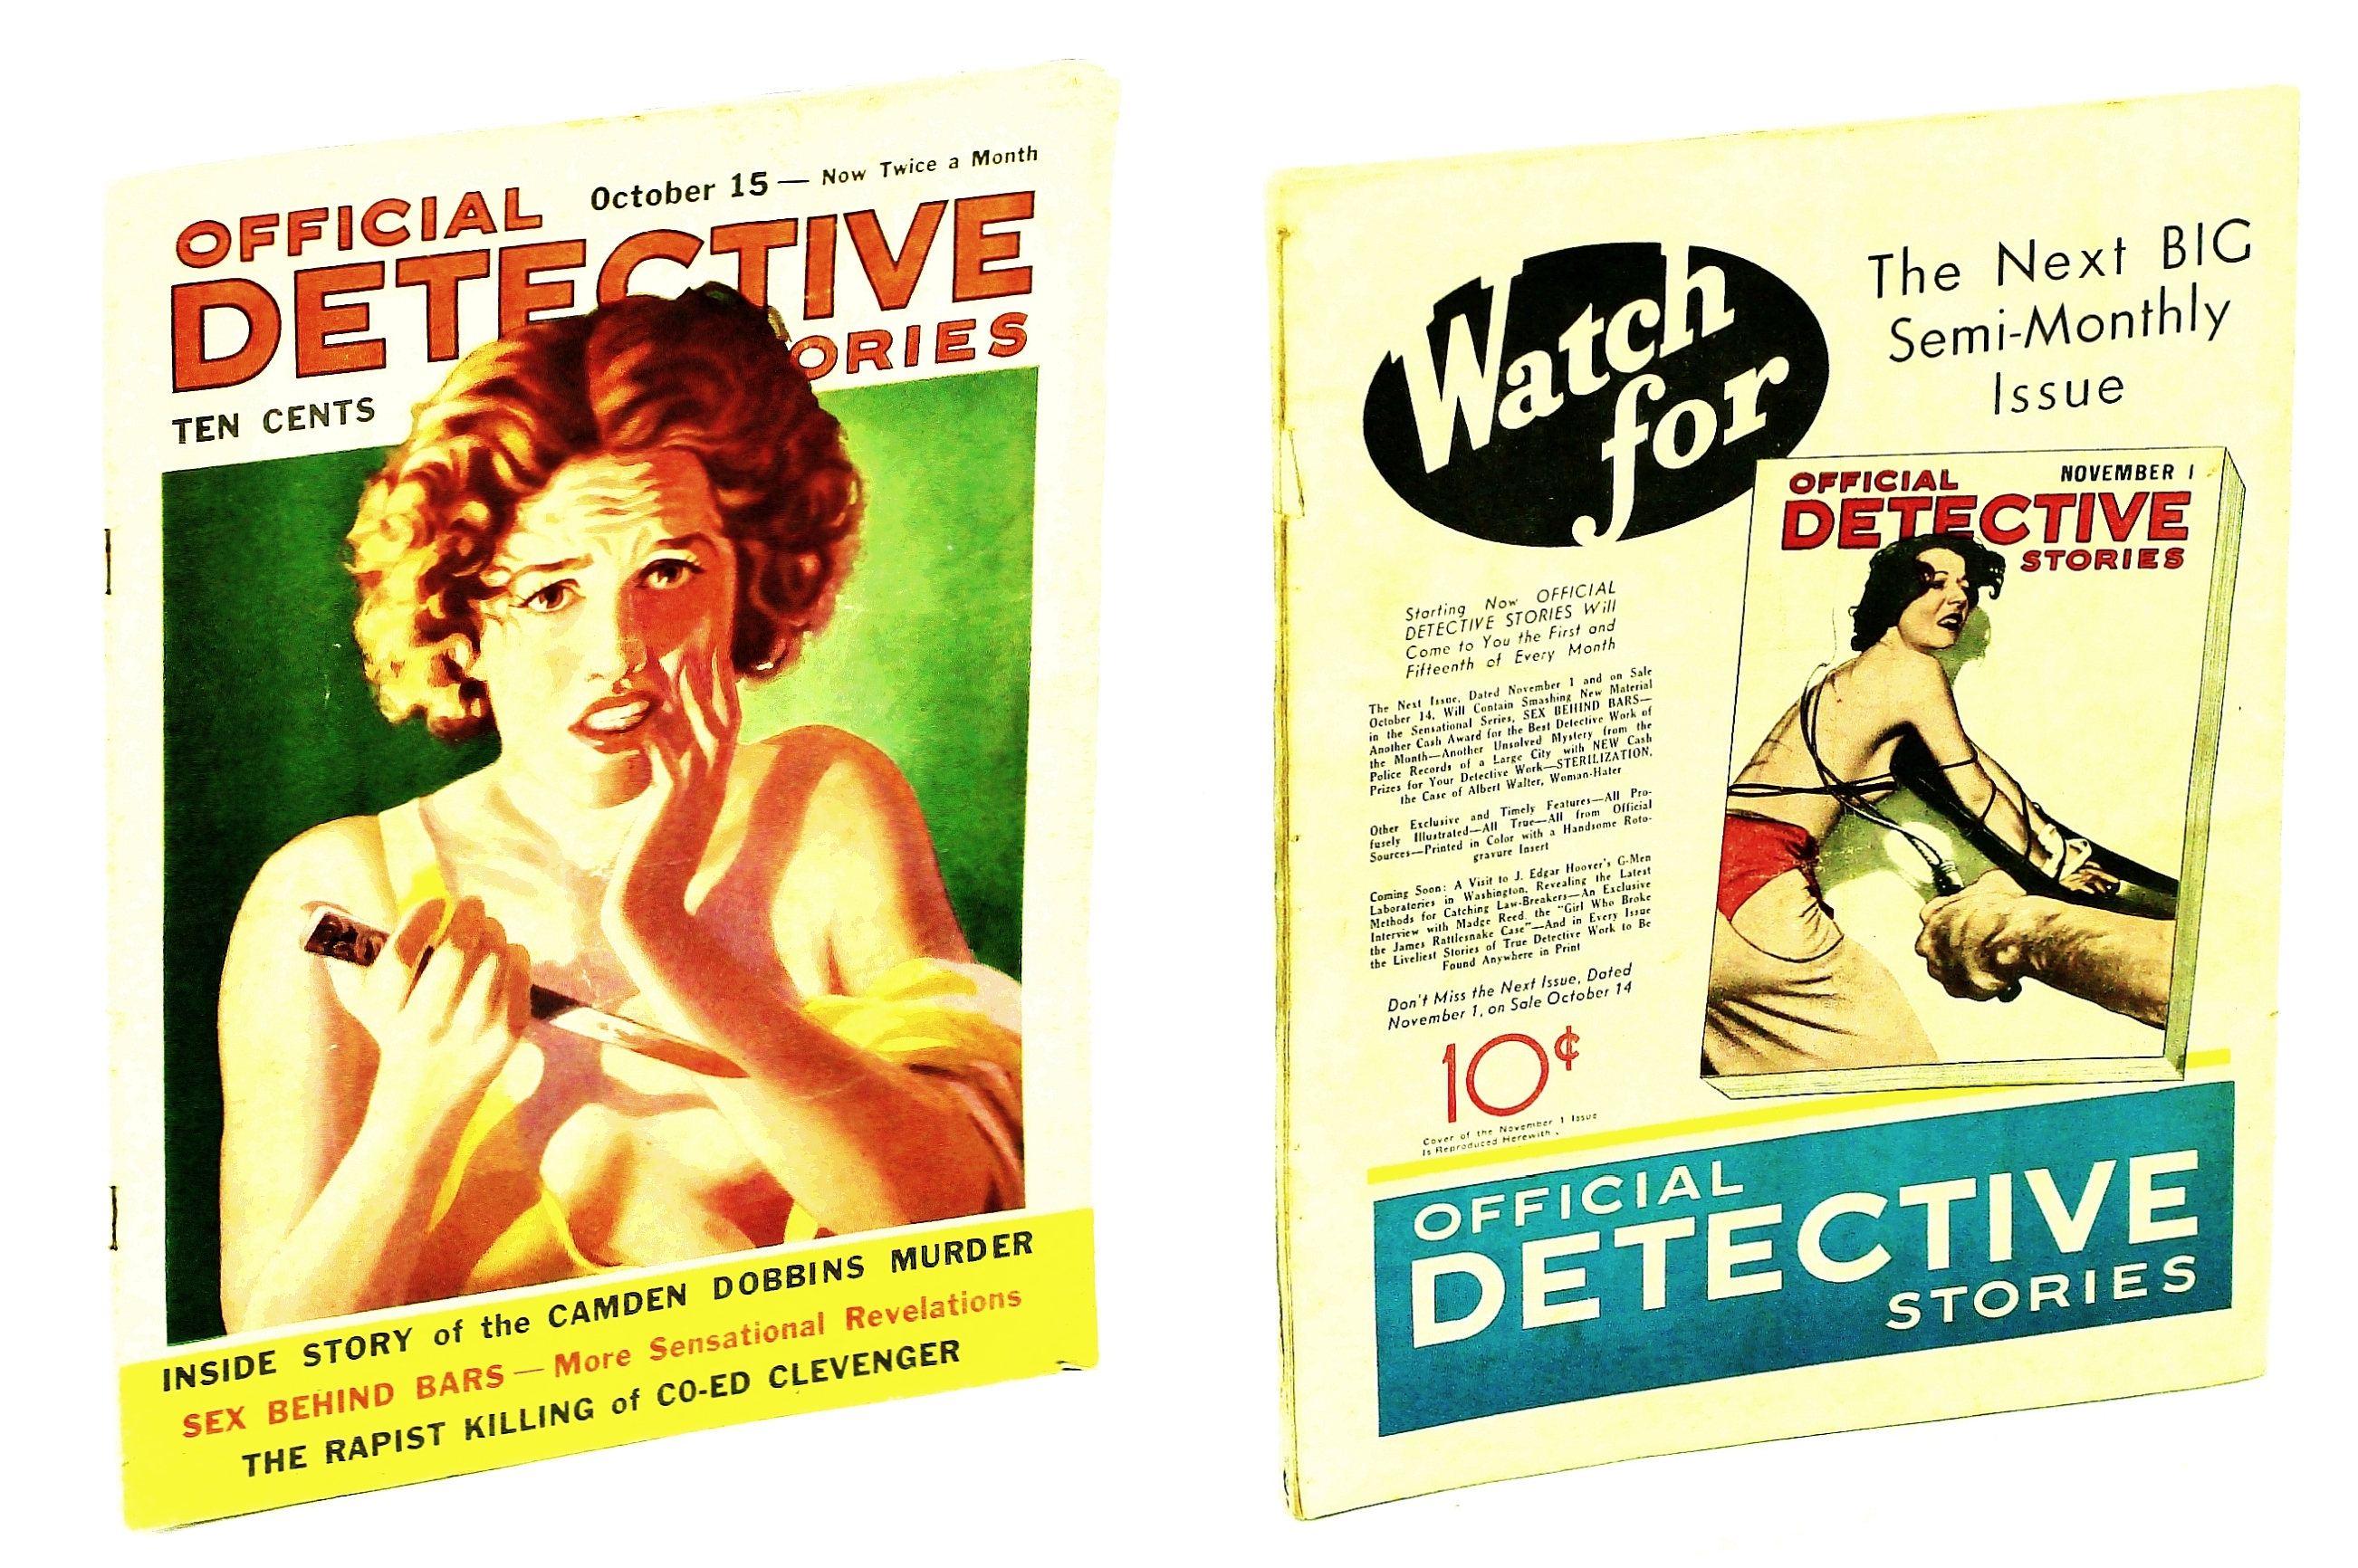 Official Detective Stories Magazine, October 15, 1936, picture